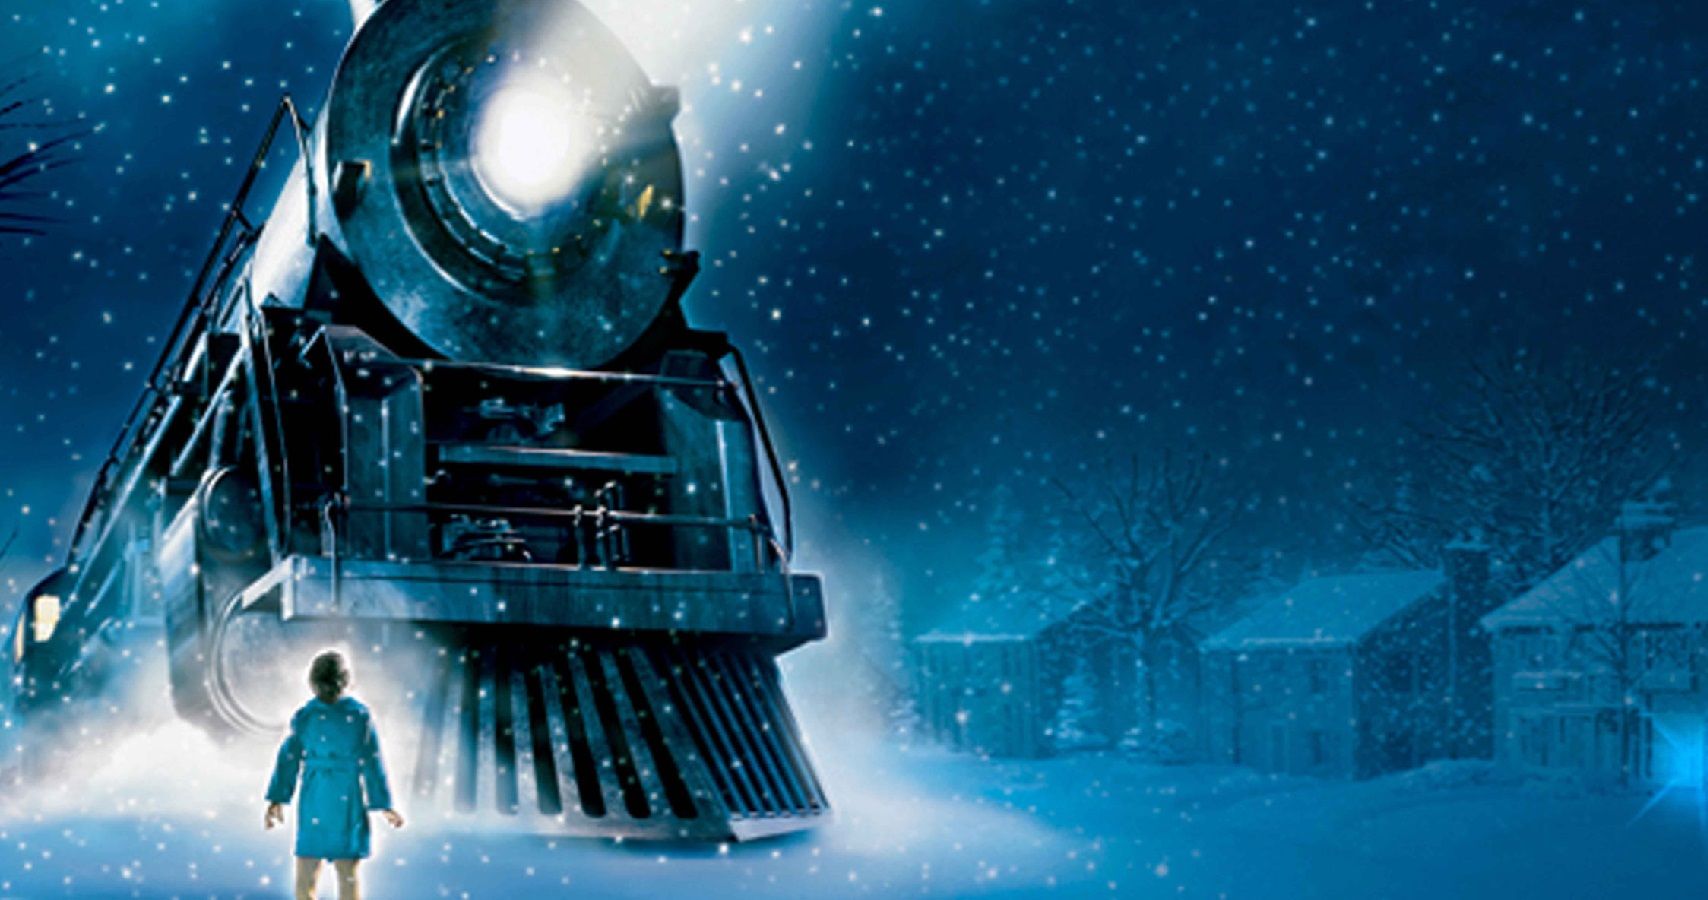 the polar express soundtrack is amazing